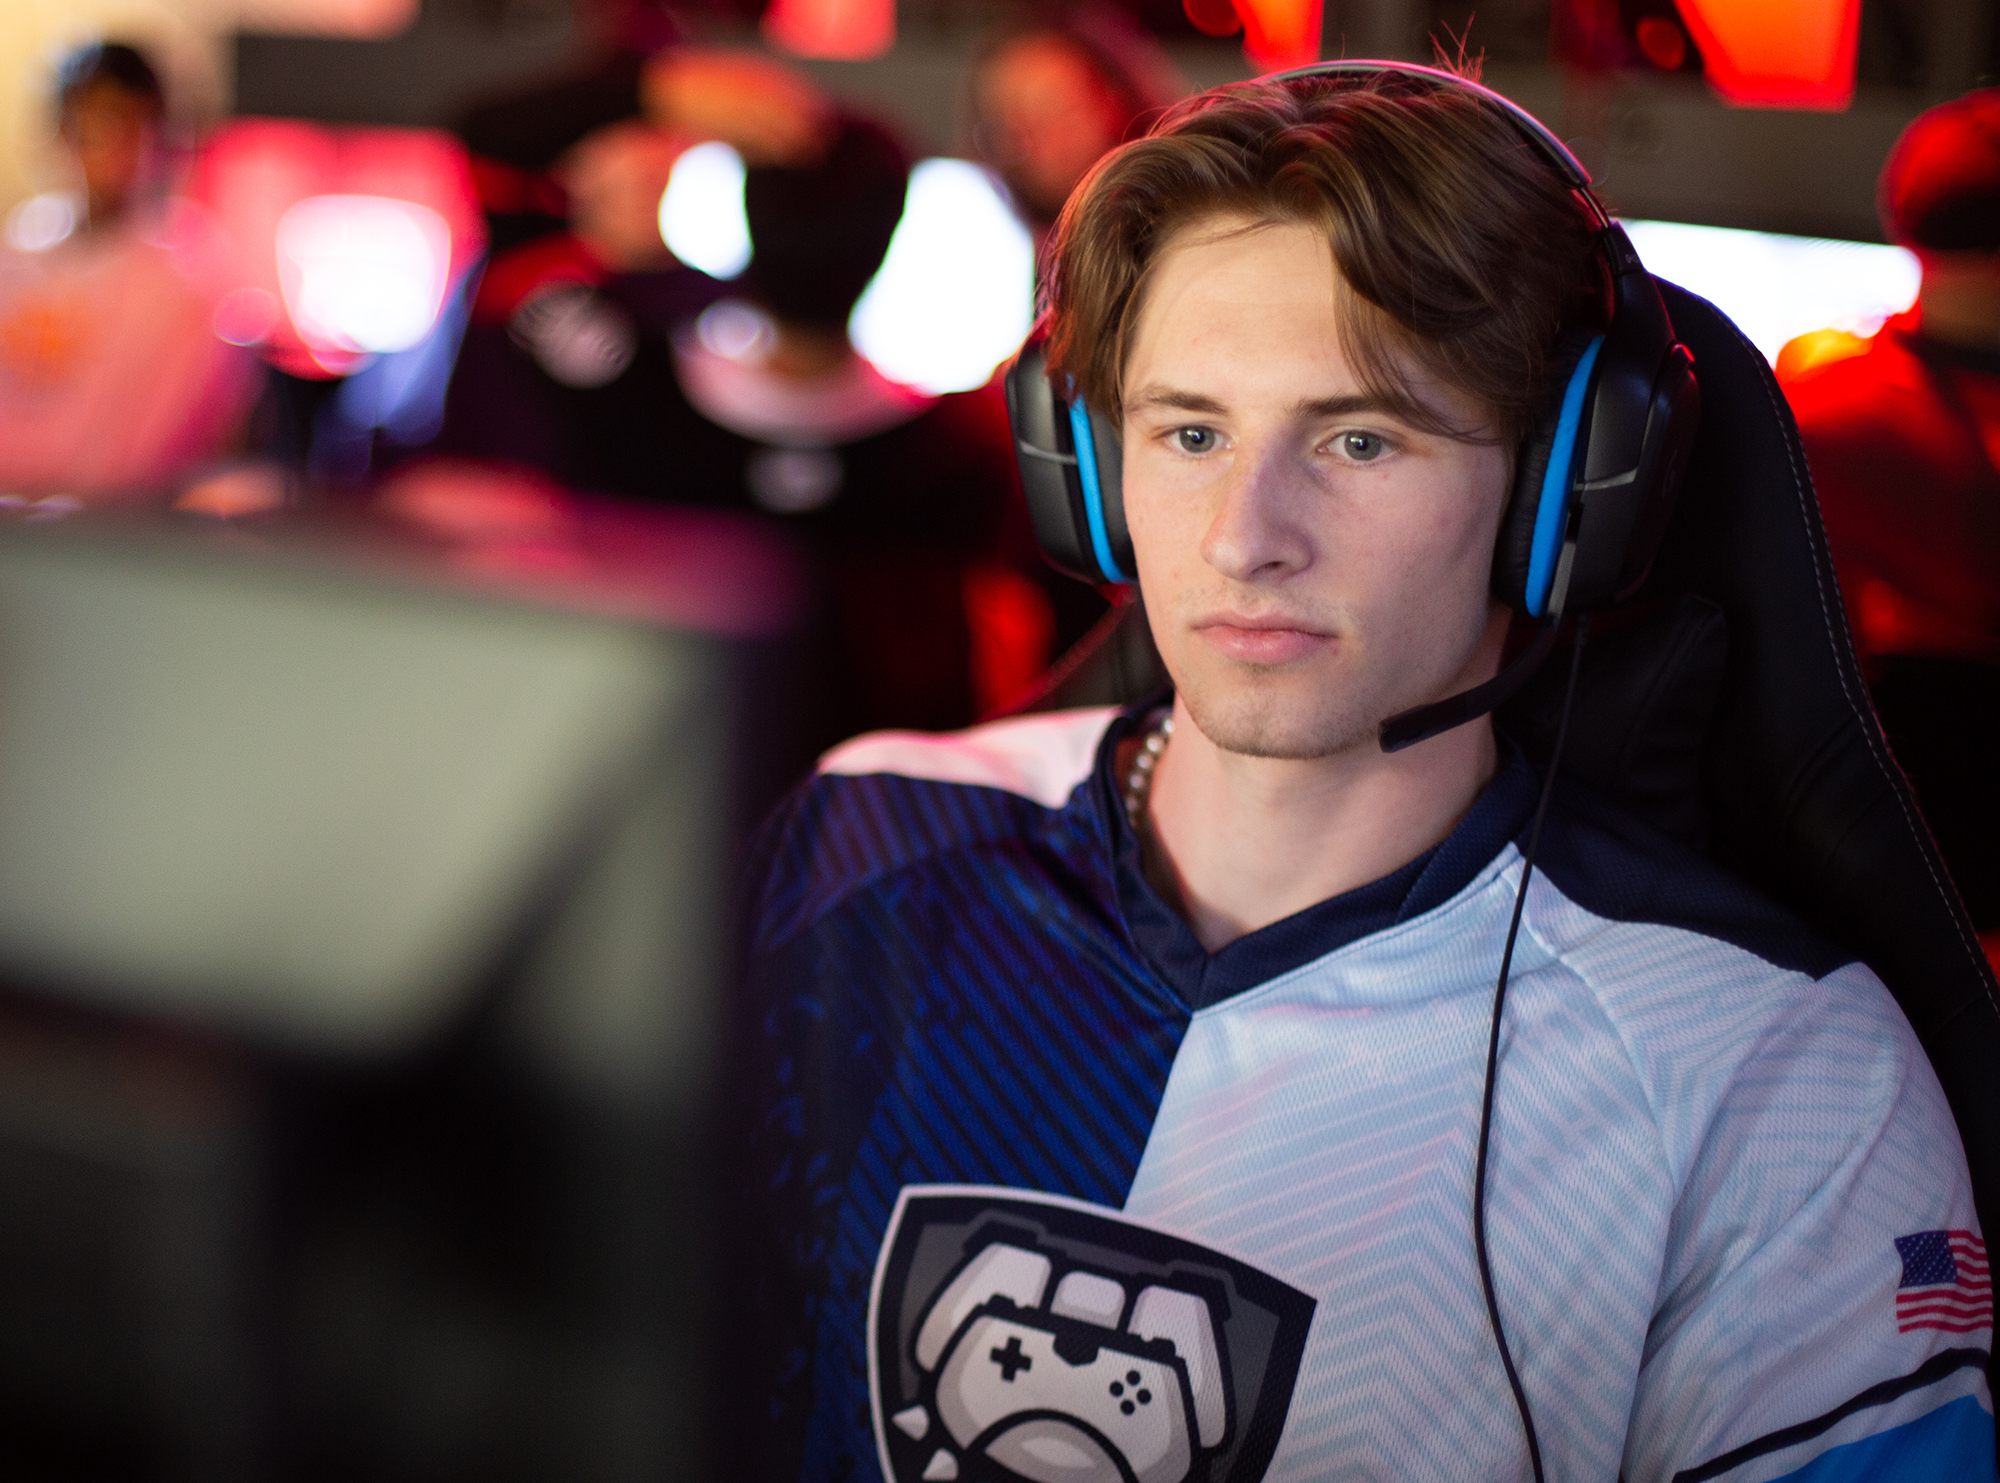 male with brown hair in Butler Esports blue and white jersey wearing headphones with a microphone sitting in front of a computer